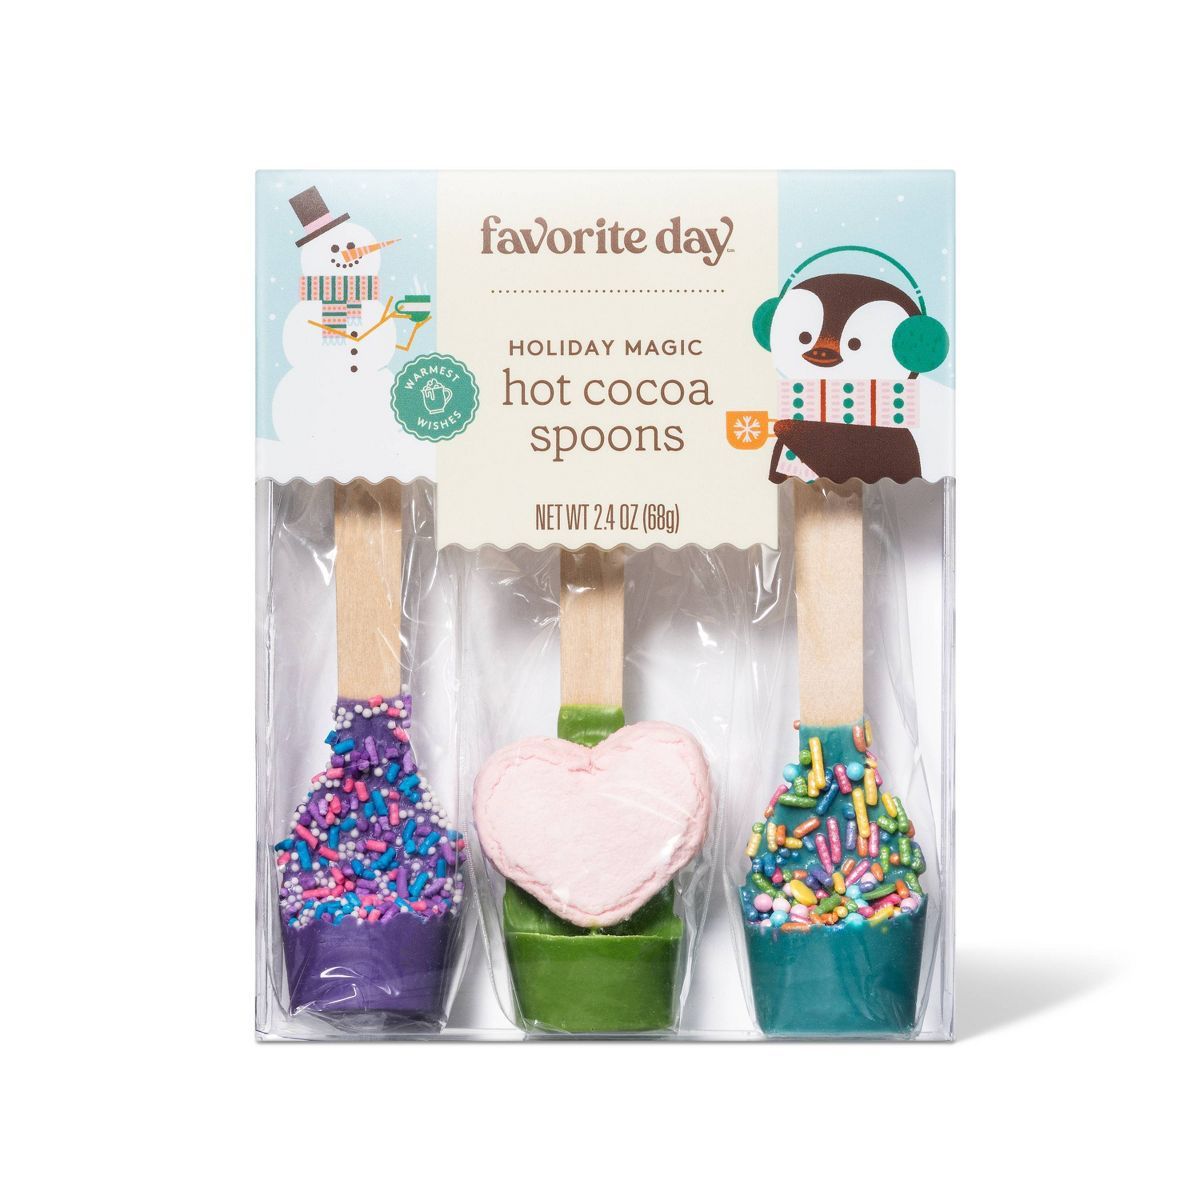 Holiday Magic Hot Cocoa Spoons - 2.4oz - Favorite Day™ | Target